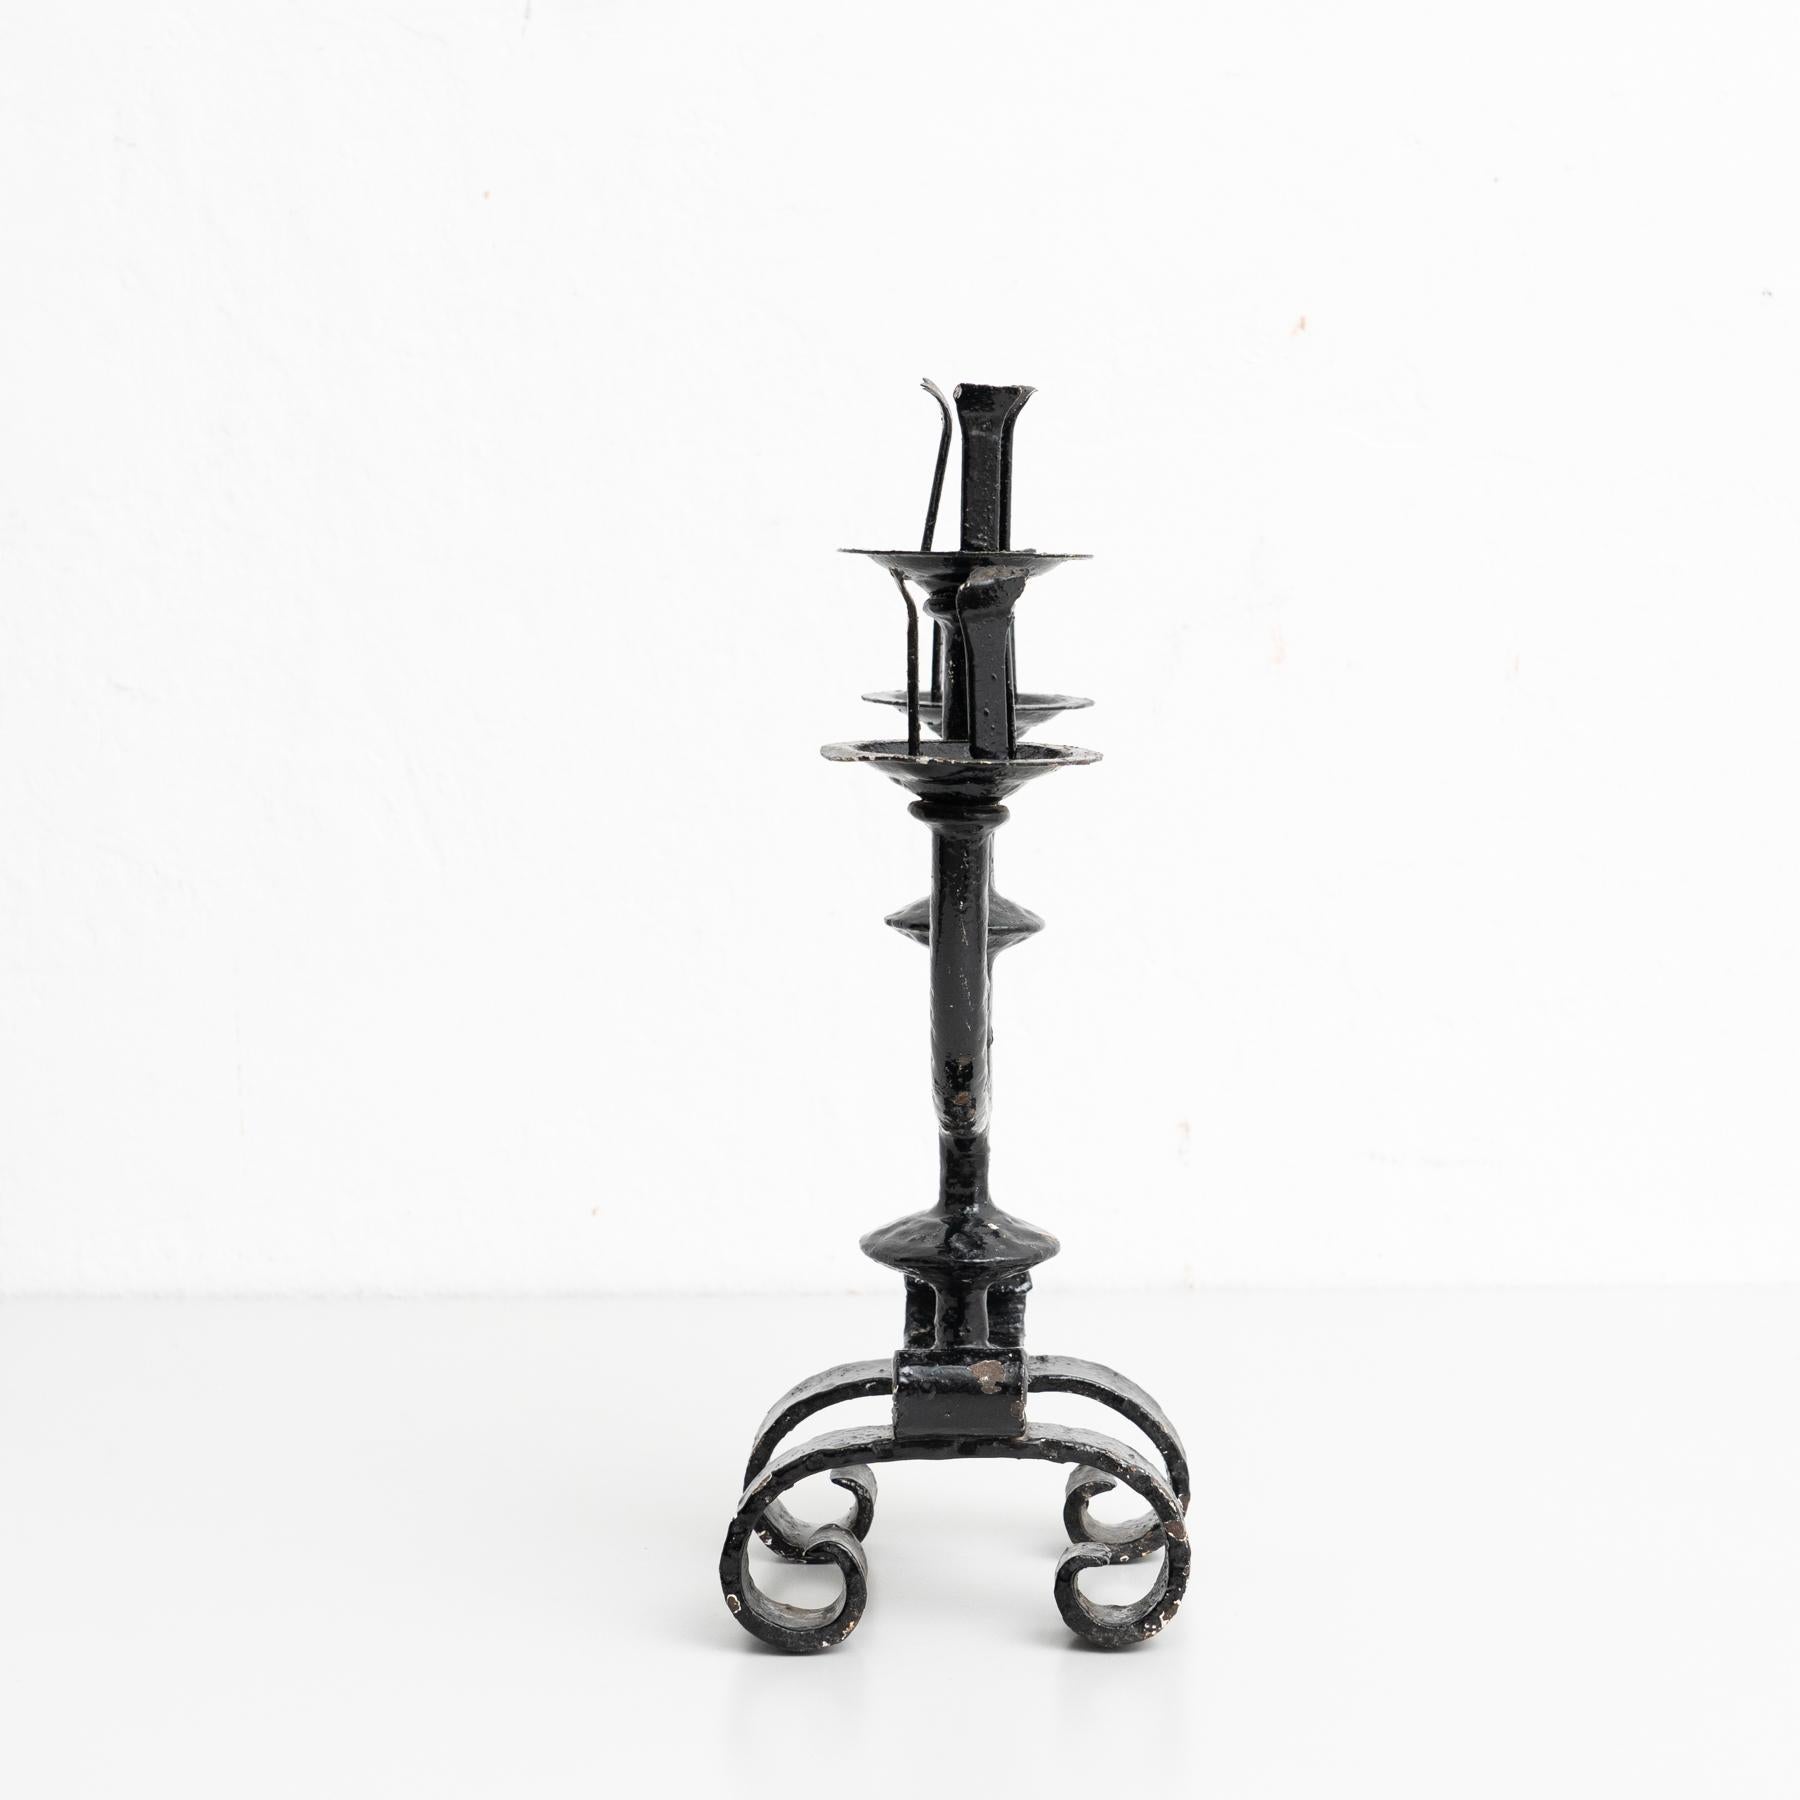 Rustic Metal Candle Holder, circa 1940 For Sale 2